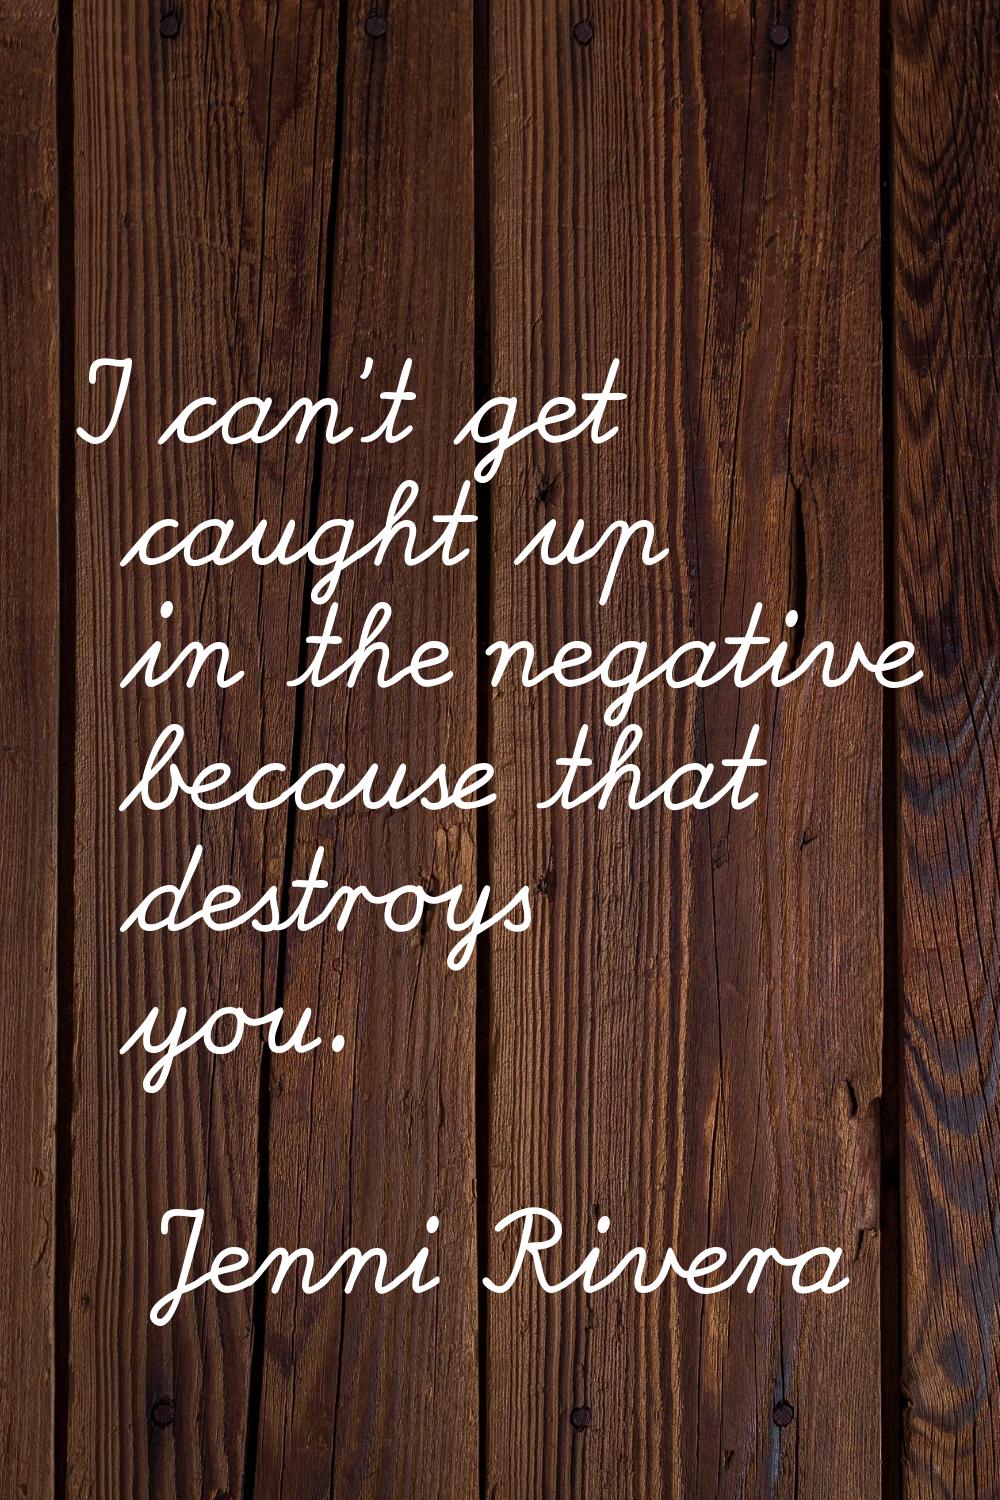 I can't get caught up in the negative because that destroys you.